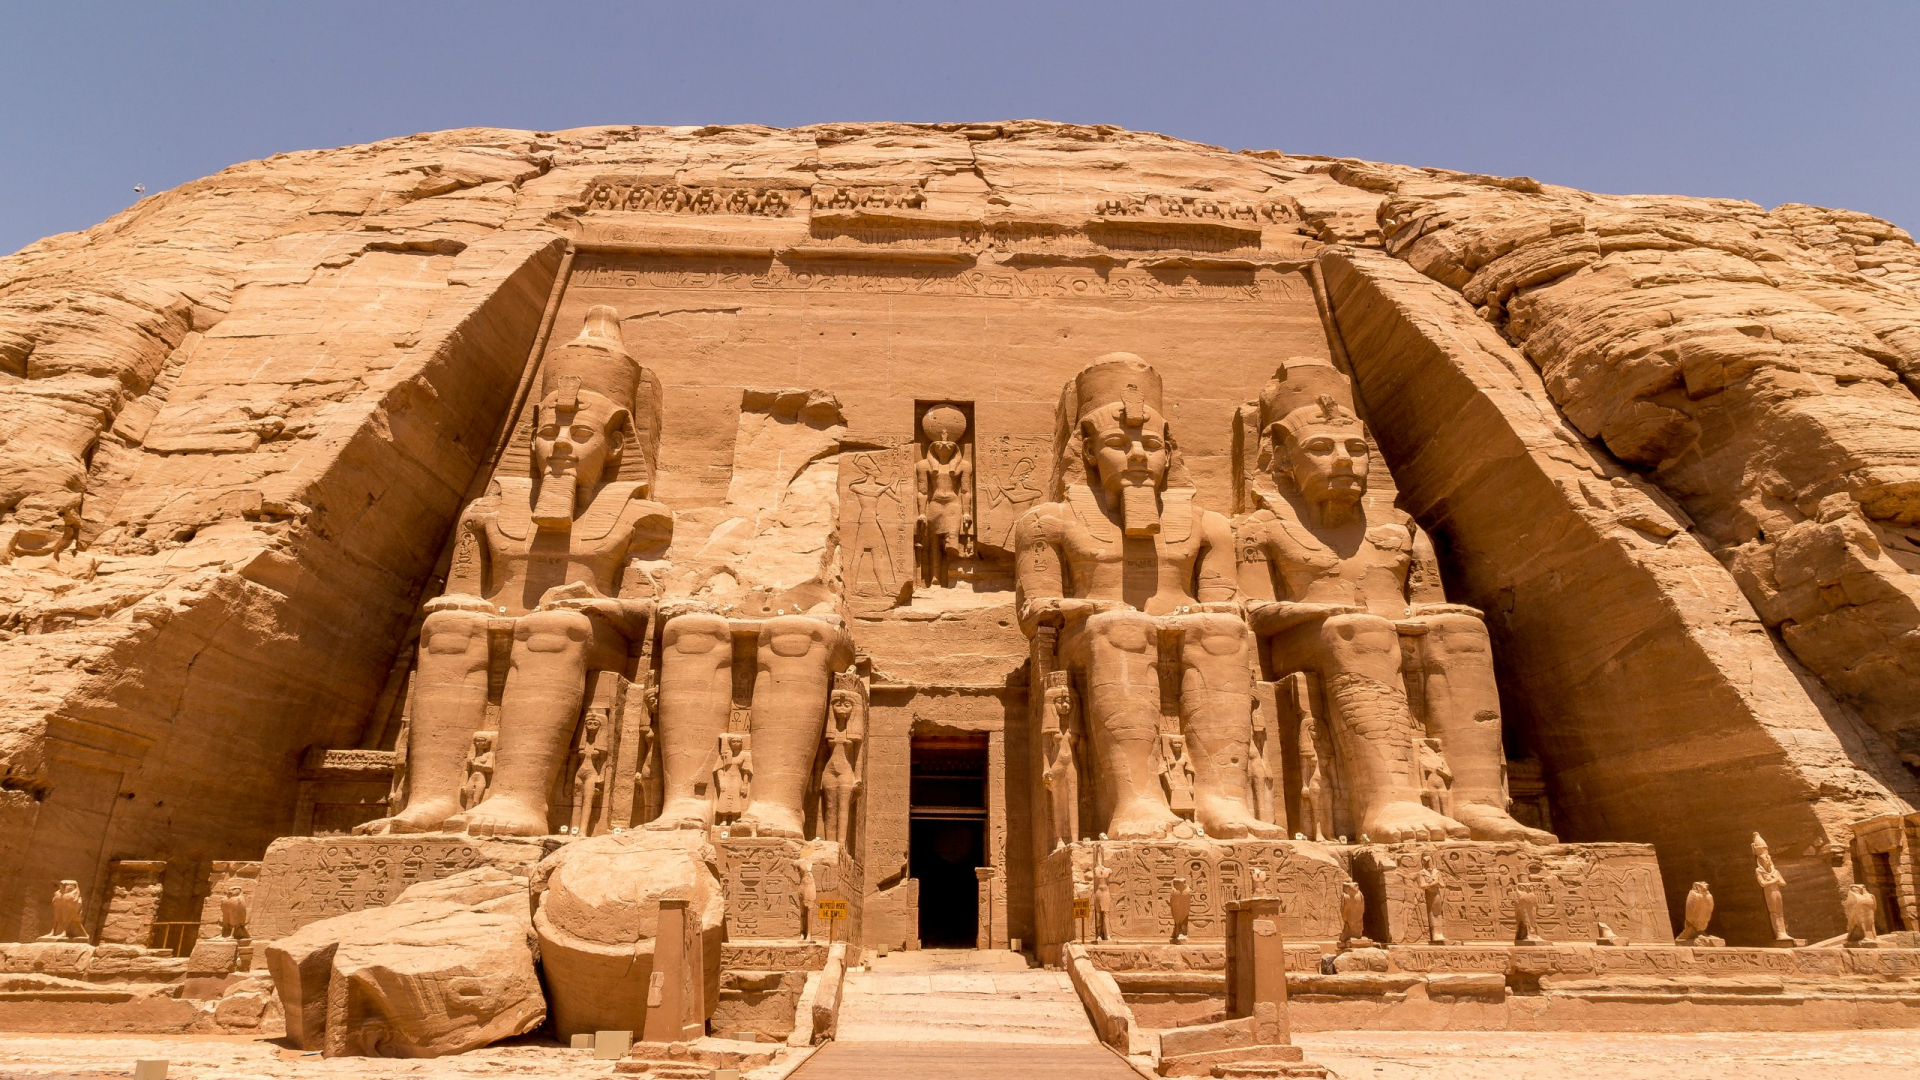 The Front of the Abu Simbel Temple, Aswan, Egypt.